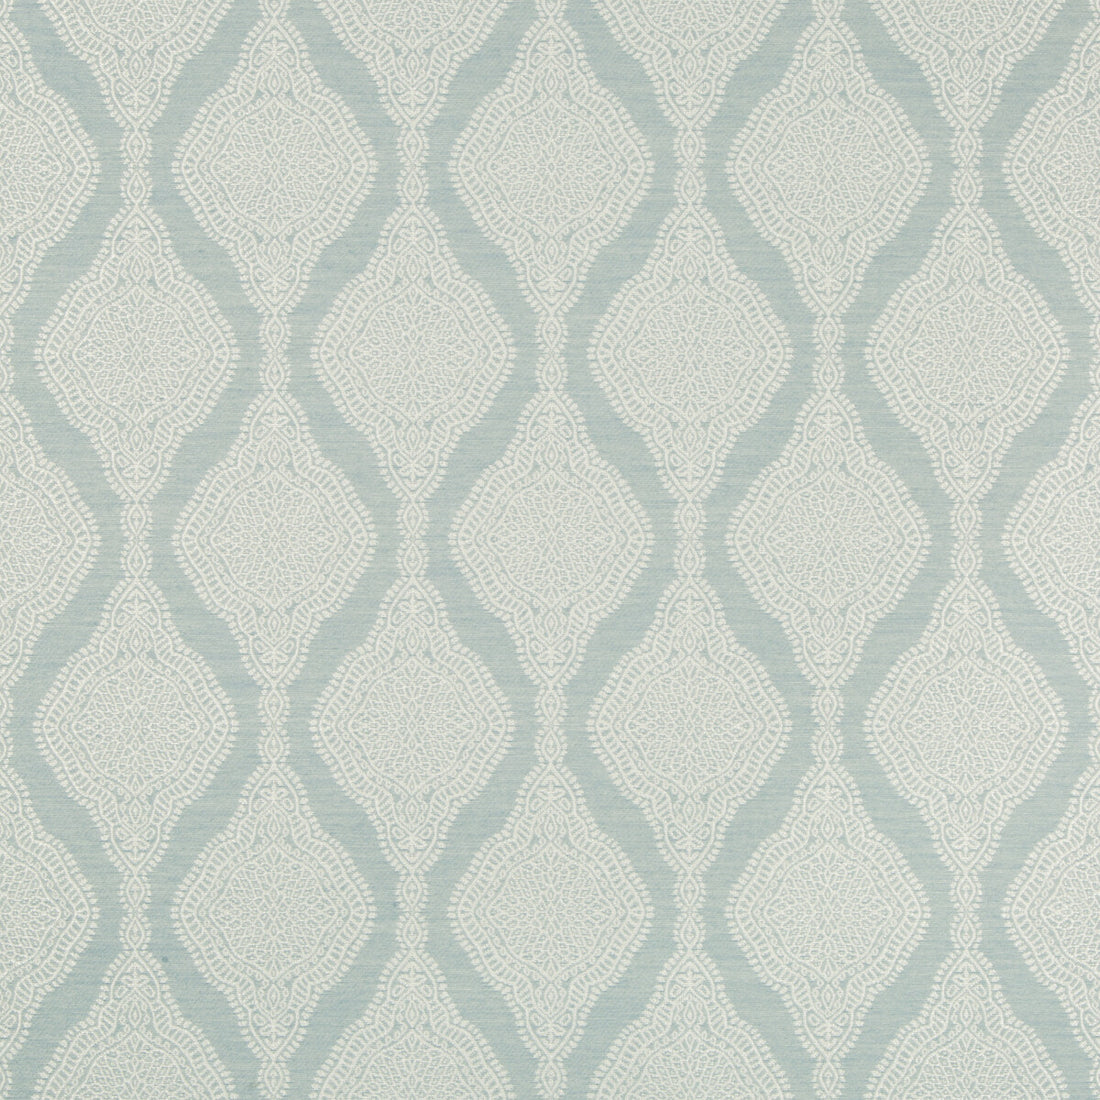 Liliana fabric in mineral color - pattern 32935.15.0 - by Kravet Contract in the Gis Crypton collection